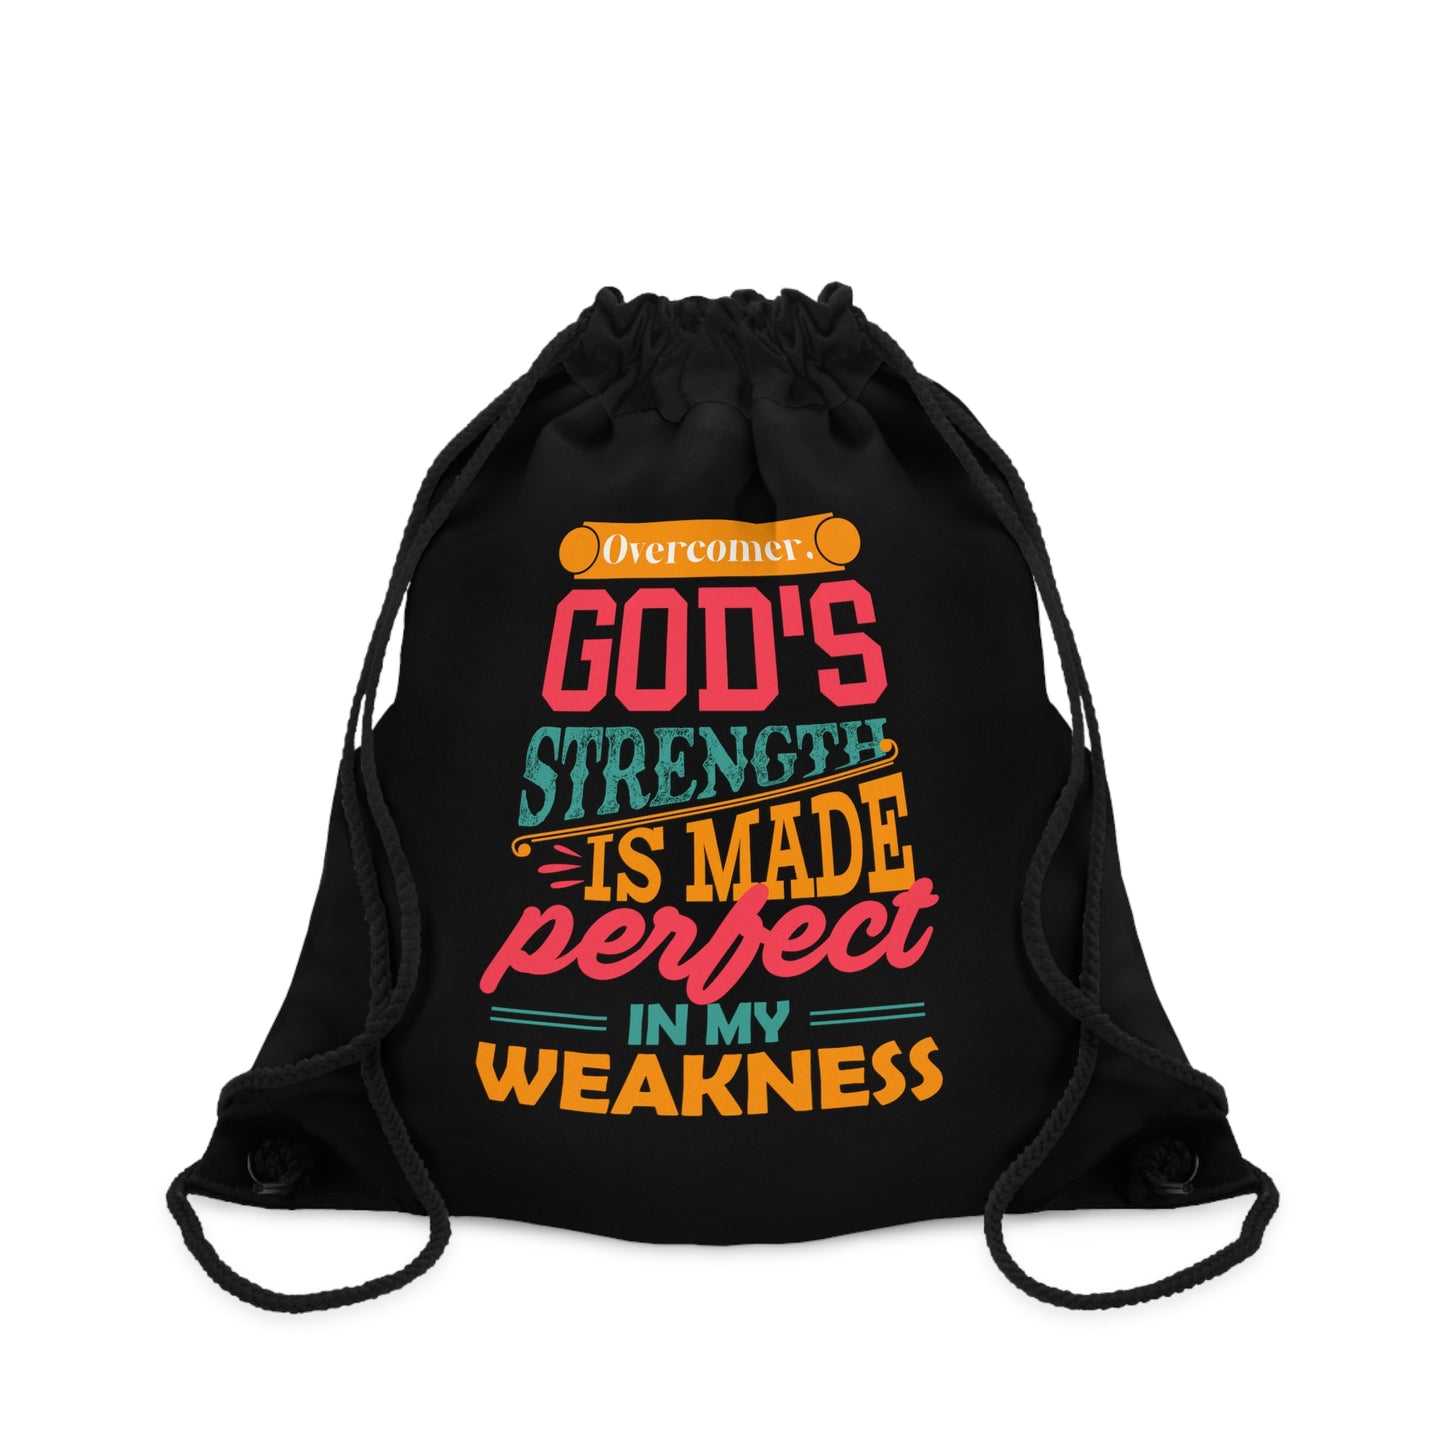 Overcomer, God's Strength Is Made Perfect In My Weakness Drawstring Bag